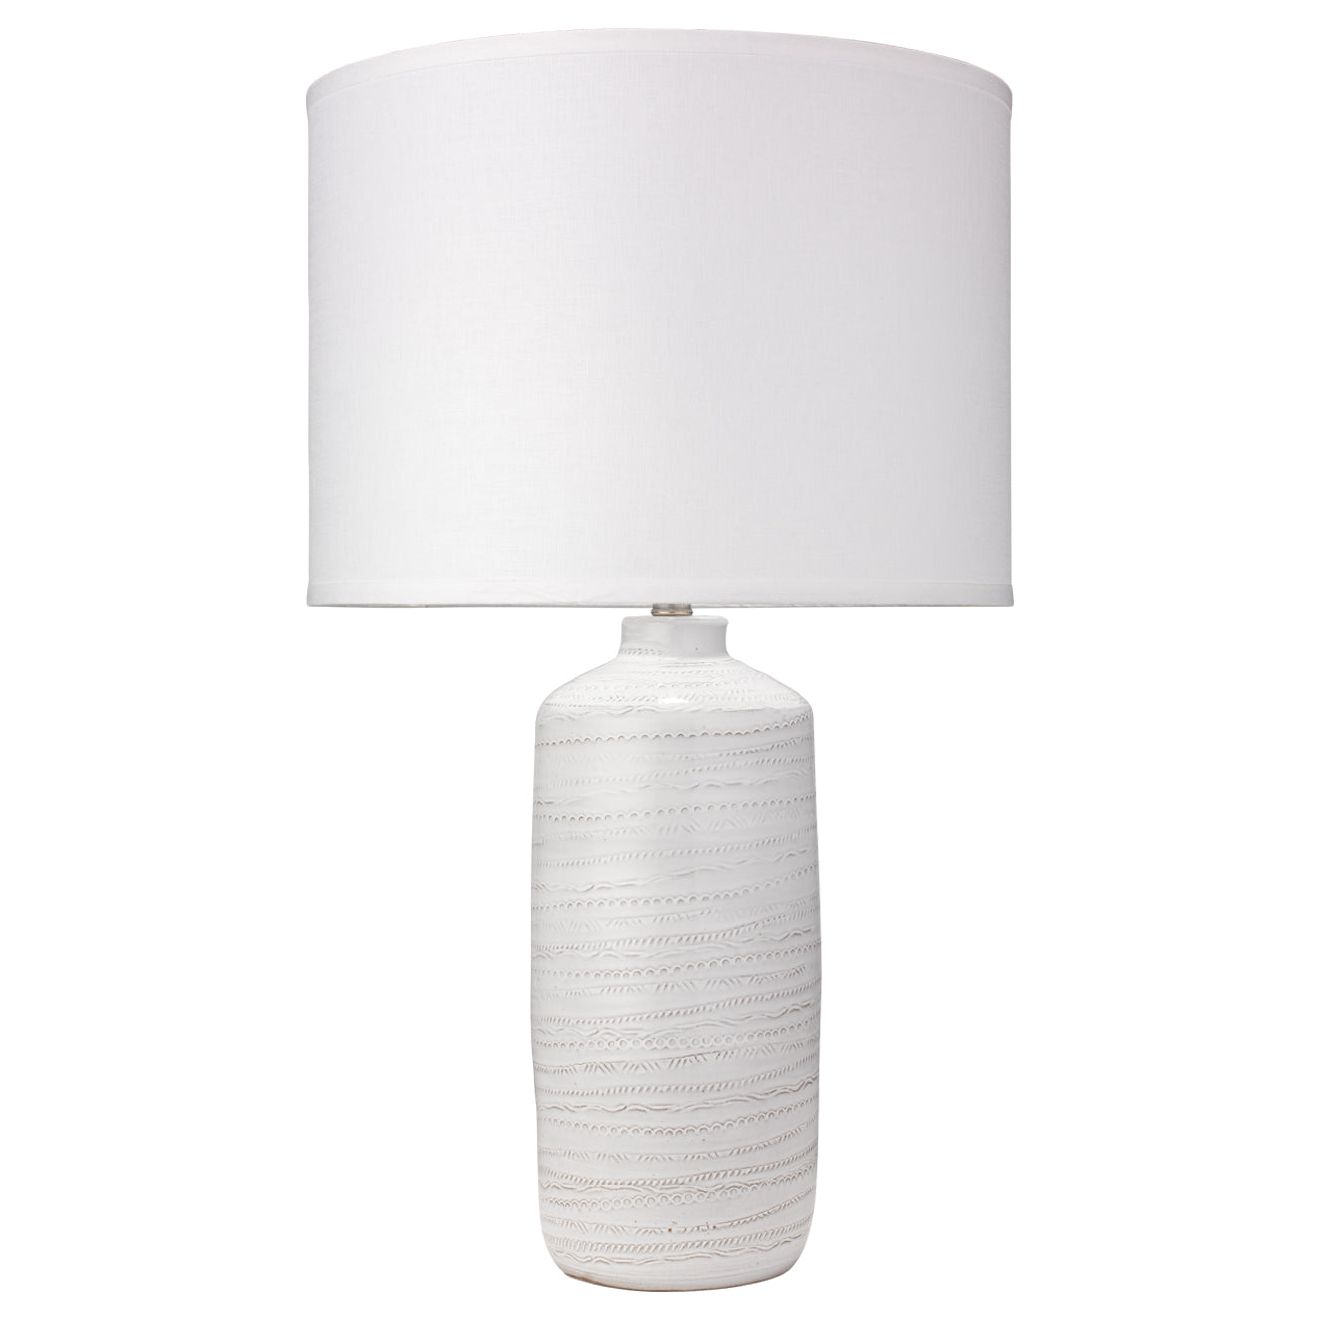 Jamie Young Company - 9TRACWHD131L - Trace Table Lamp - Trace - White